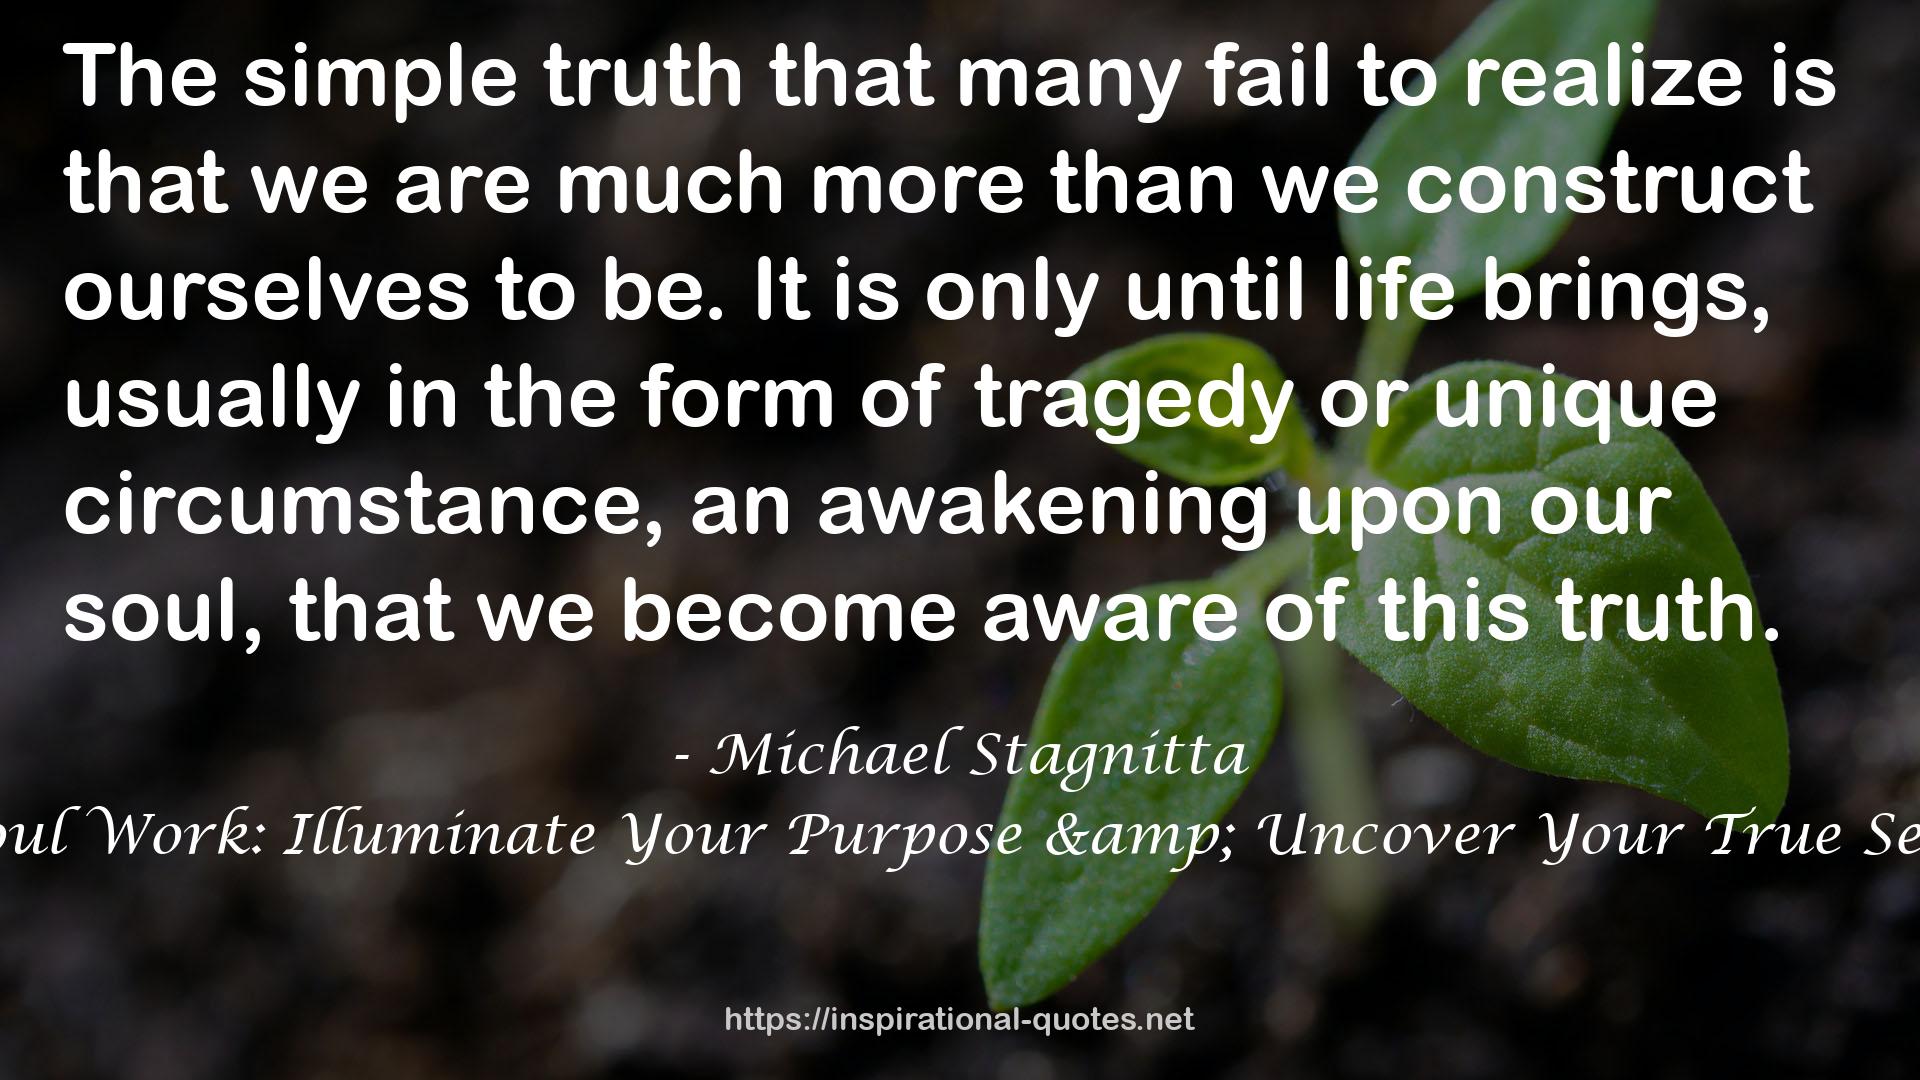 Soul Work: Illuminate Your Purpose & Uncover Your True Self QUOTES